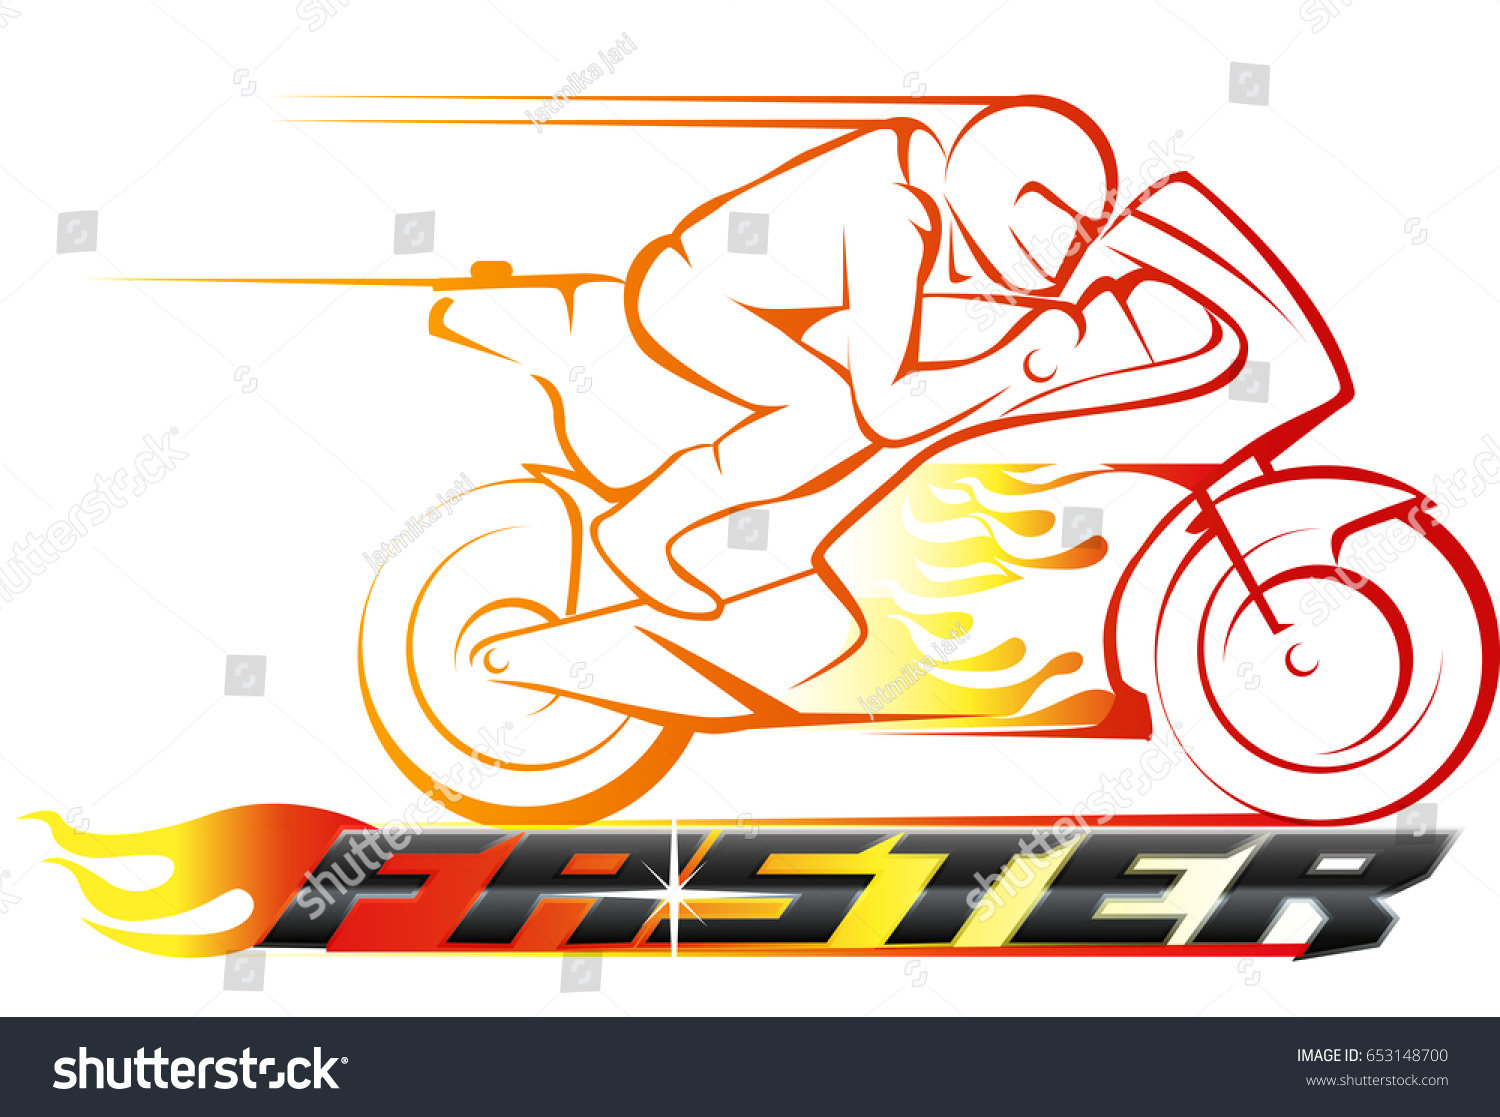 Vector Abstract Motor Racing On Fire Stock Vector 653148700